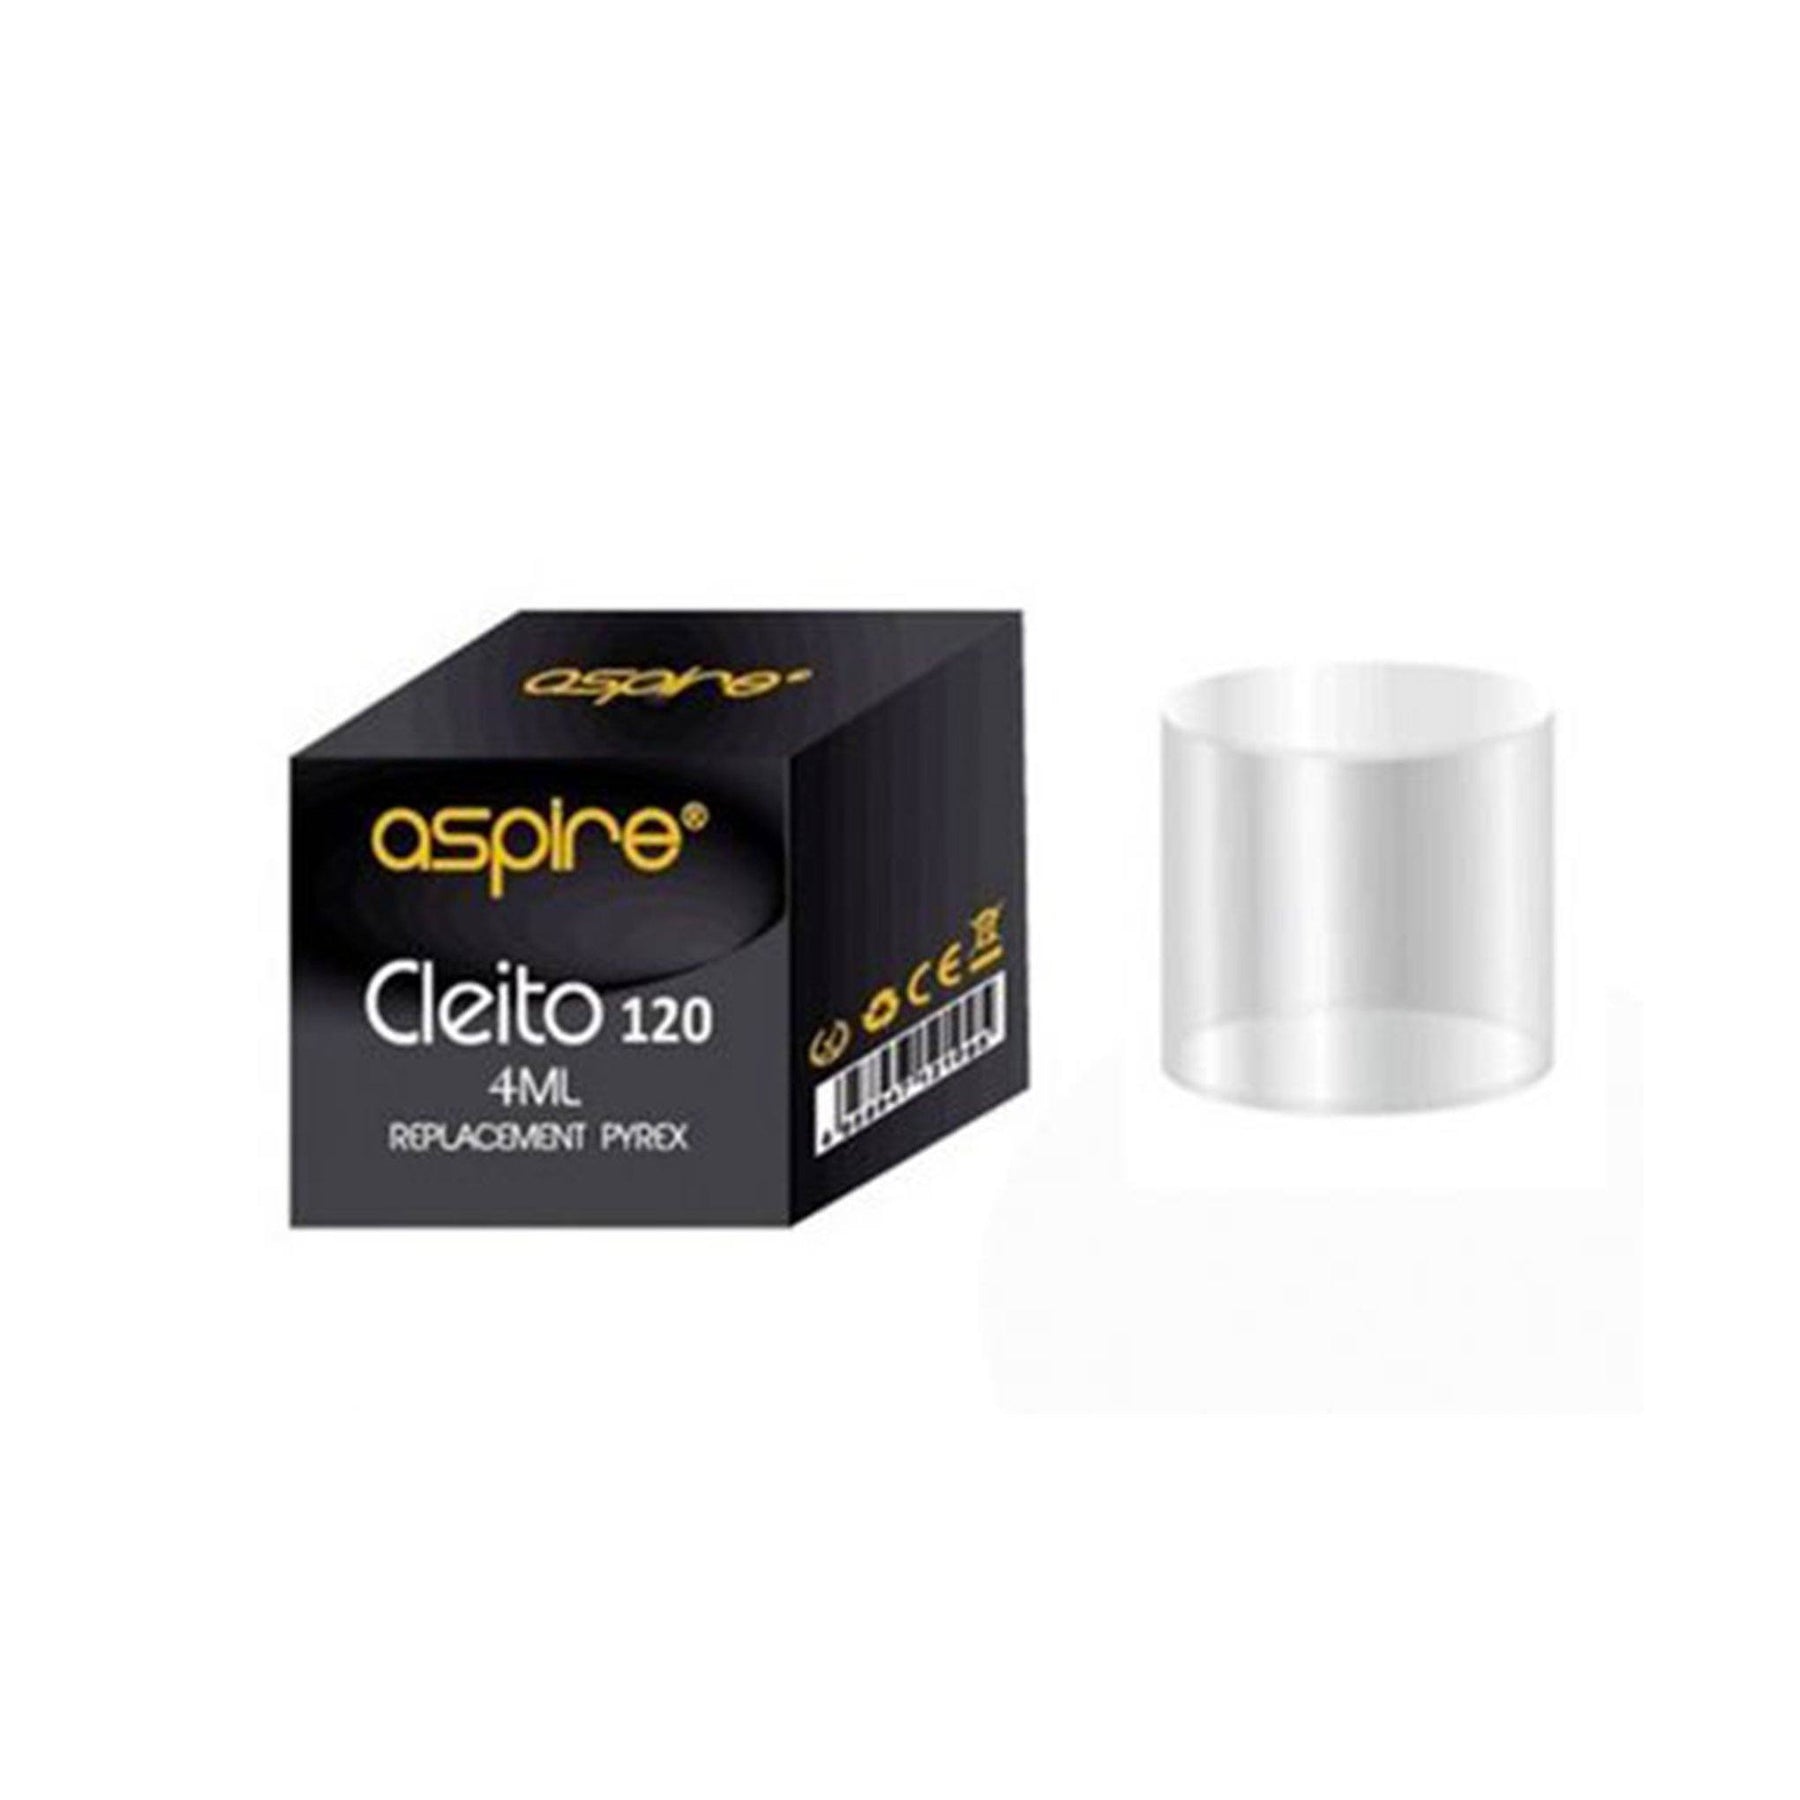 Aspire Cleito 120 Replacement Glass 4ml